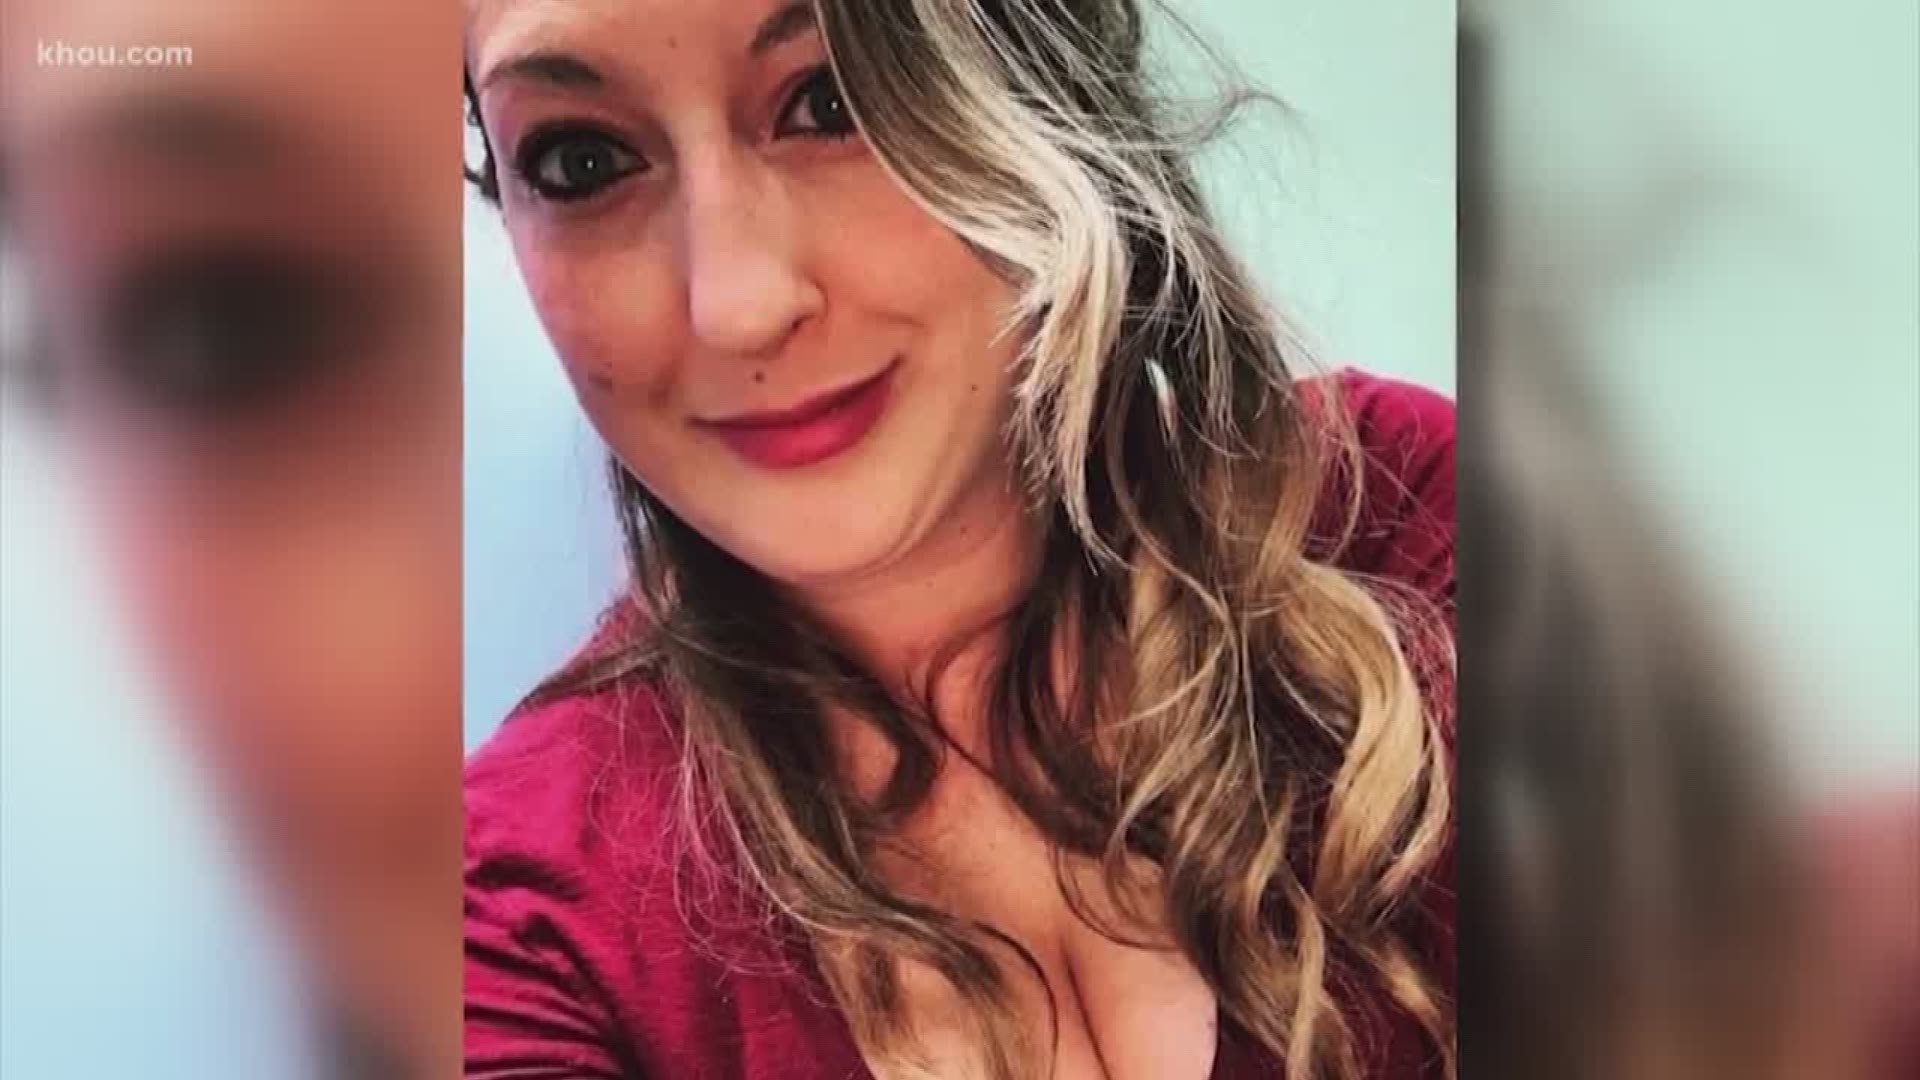 Funeral arrangements have been made for Austin woman Heidi Broussard, who was found dead in the trunk of a car at a home in Houston.